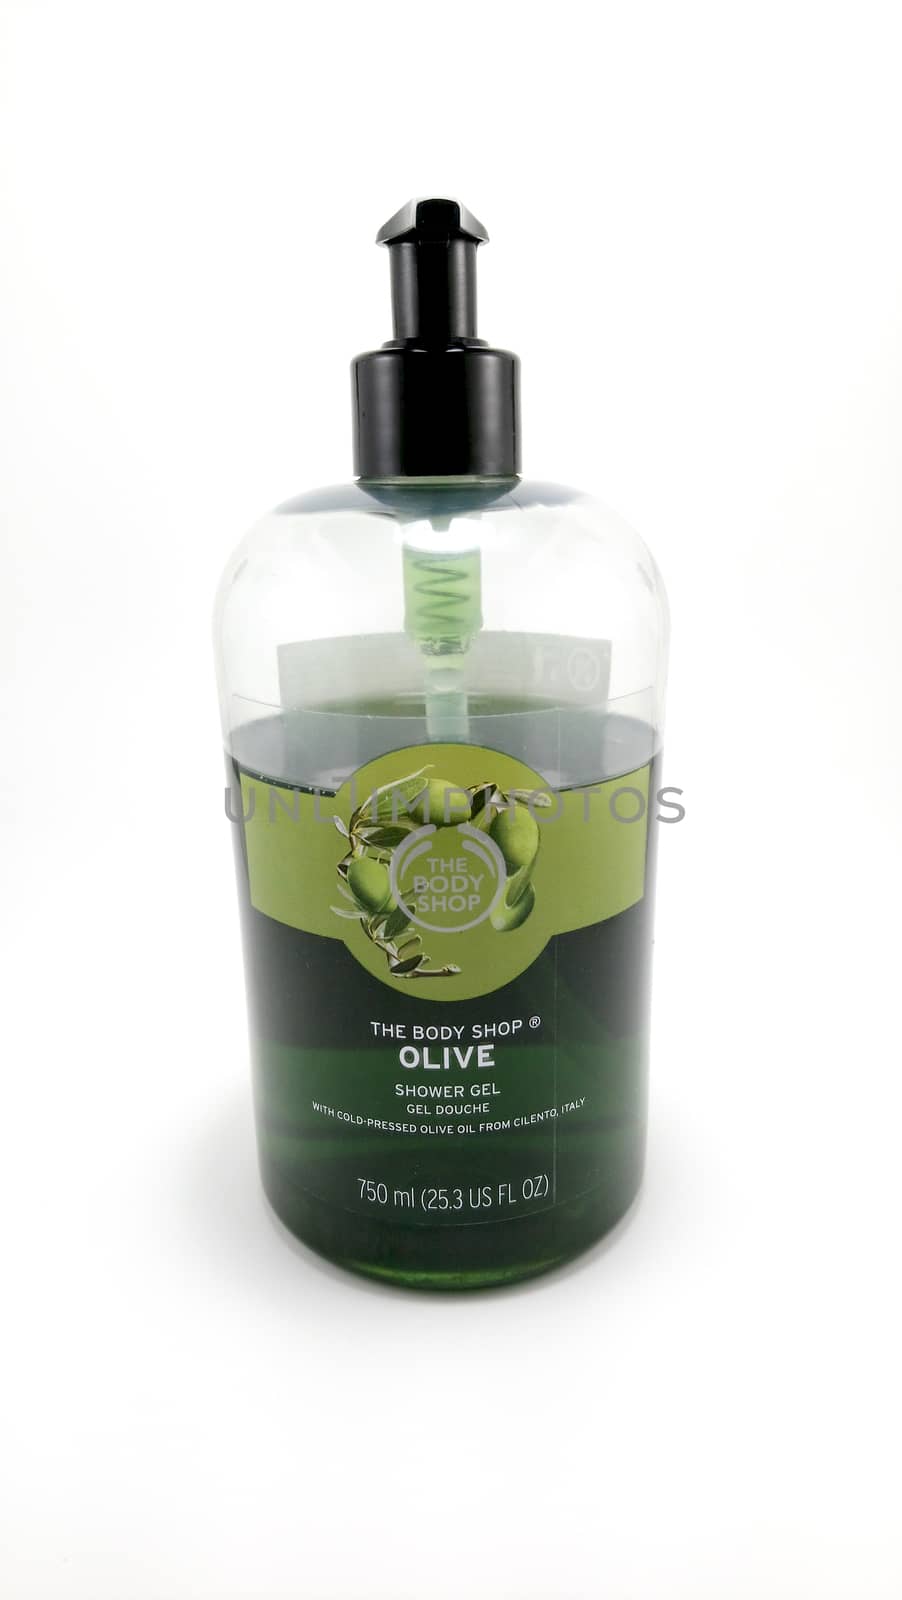 The body shop olive shower gel in Manila, Philippines by imwaltersy